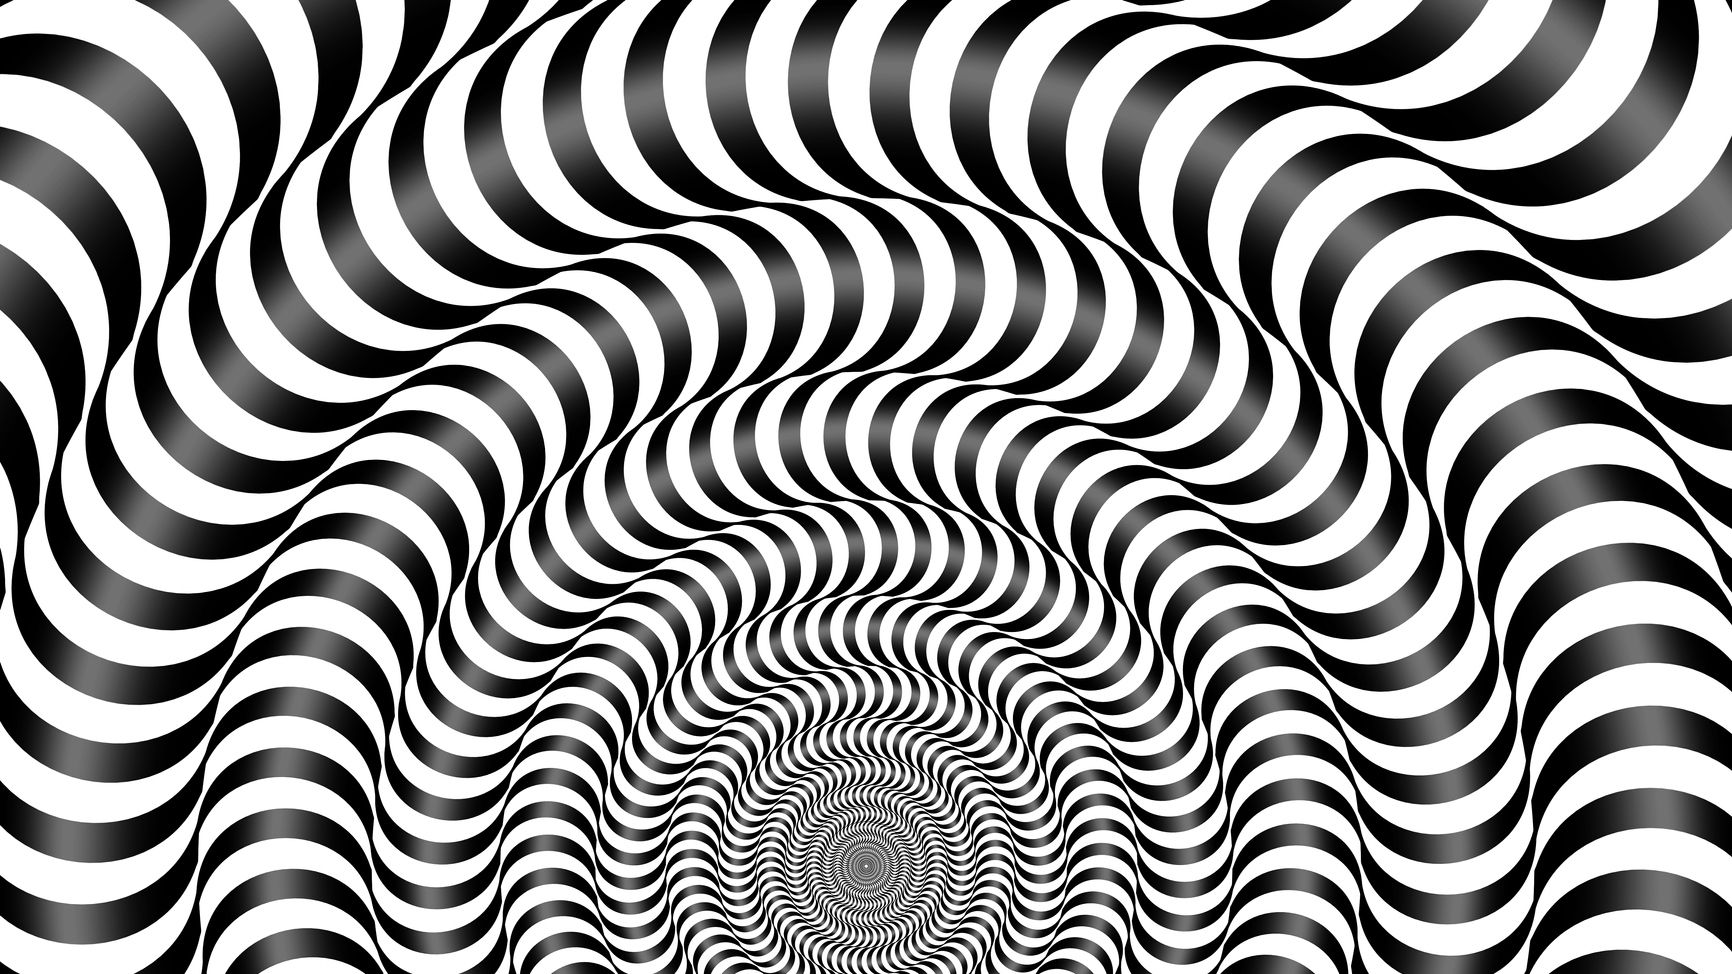 really cool optical illusions